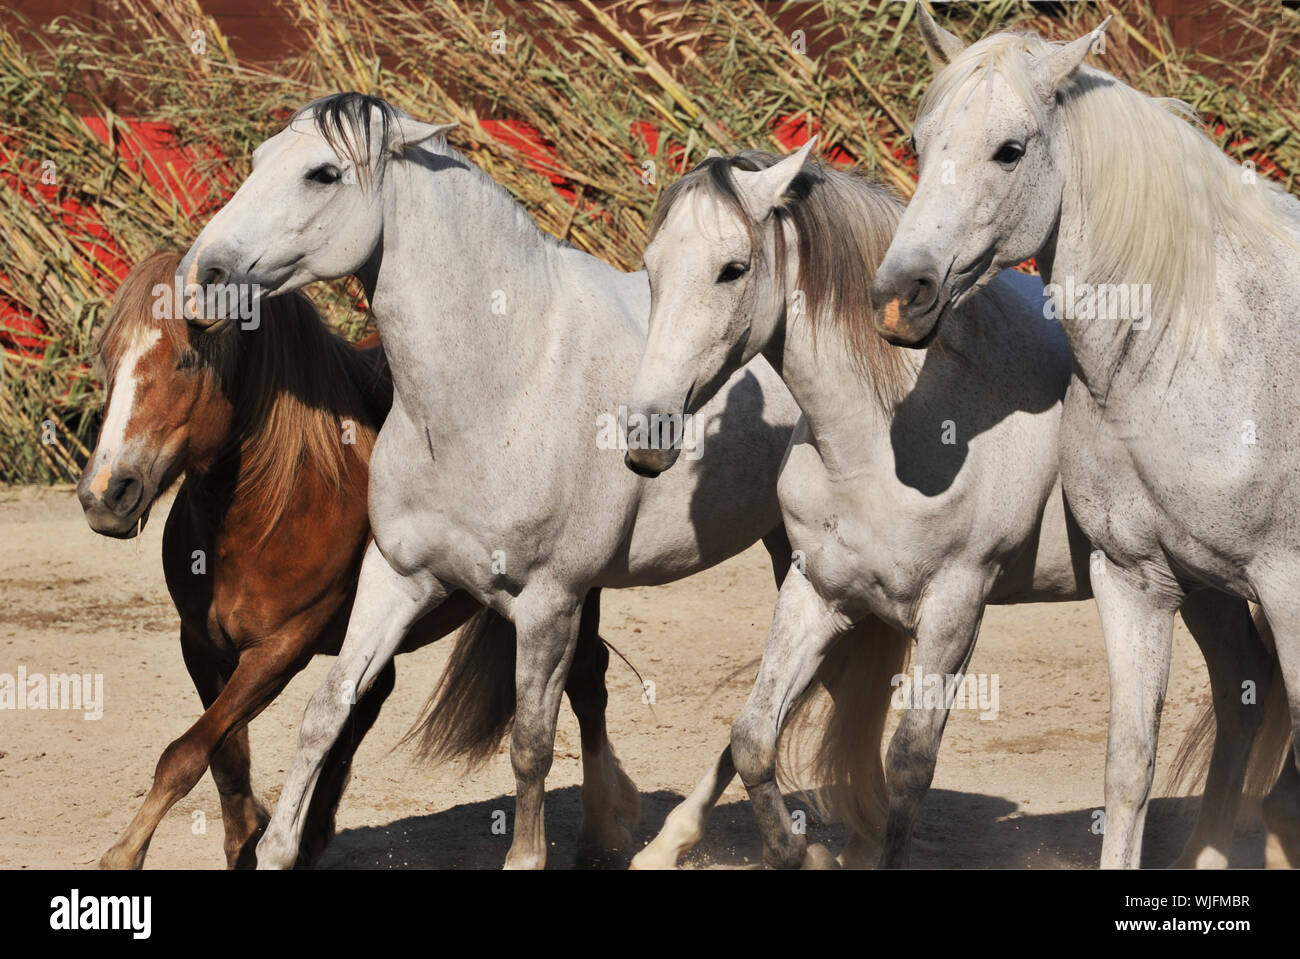 three white horses and one brown pony together Stock Photo